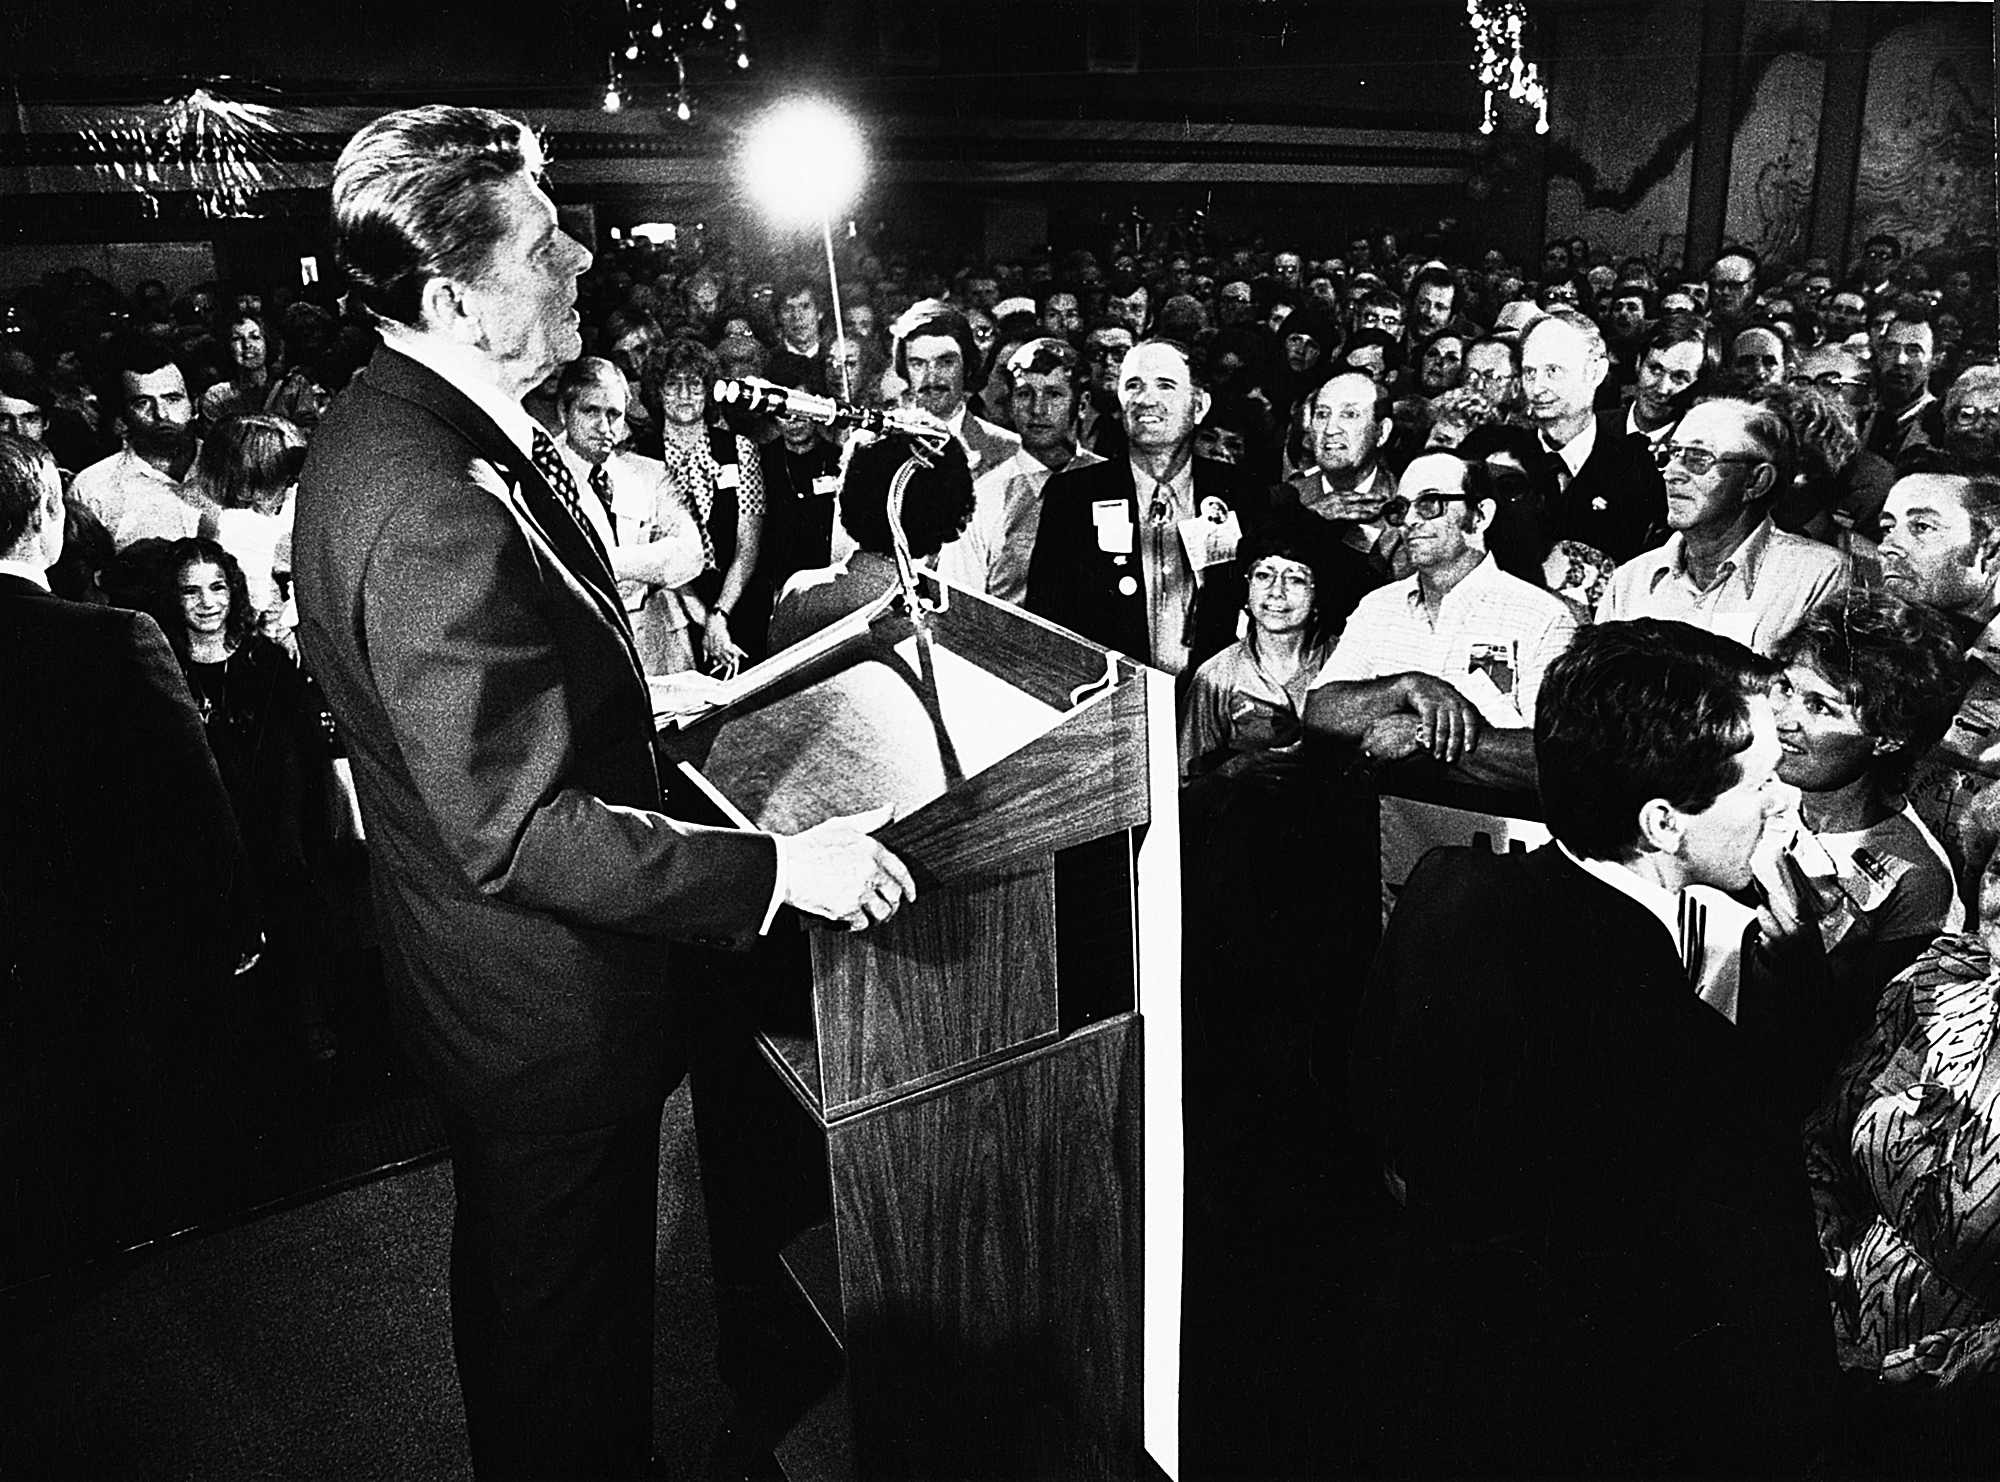 Ronald Reagan standing at a podium in an in-door venue, speaks to a crowd.